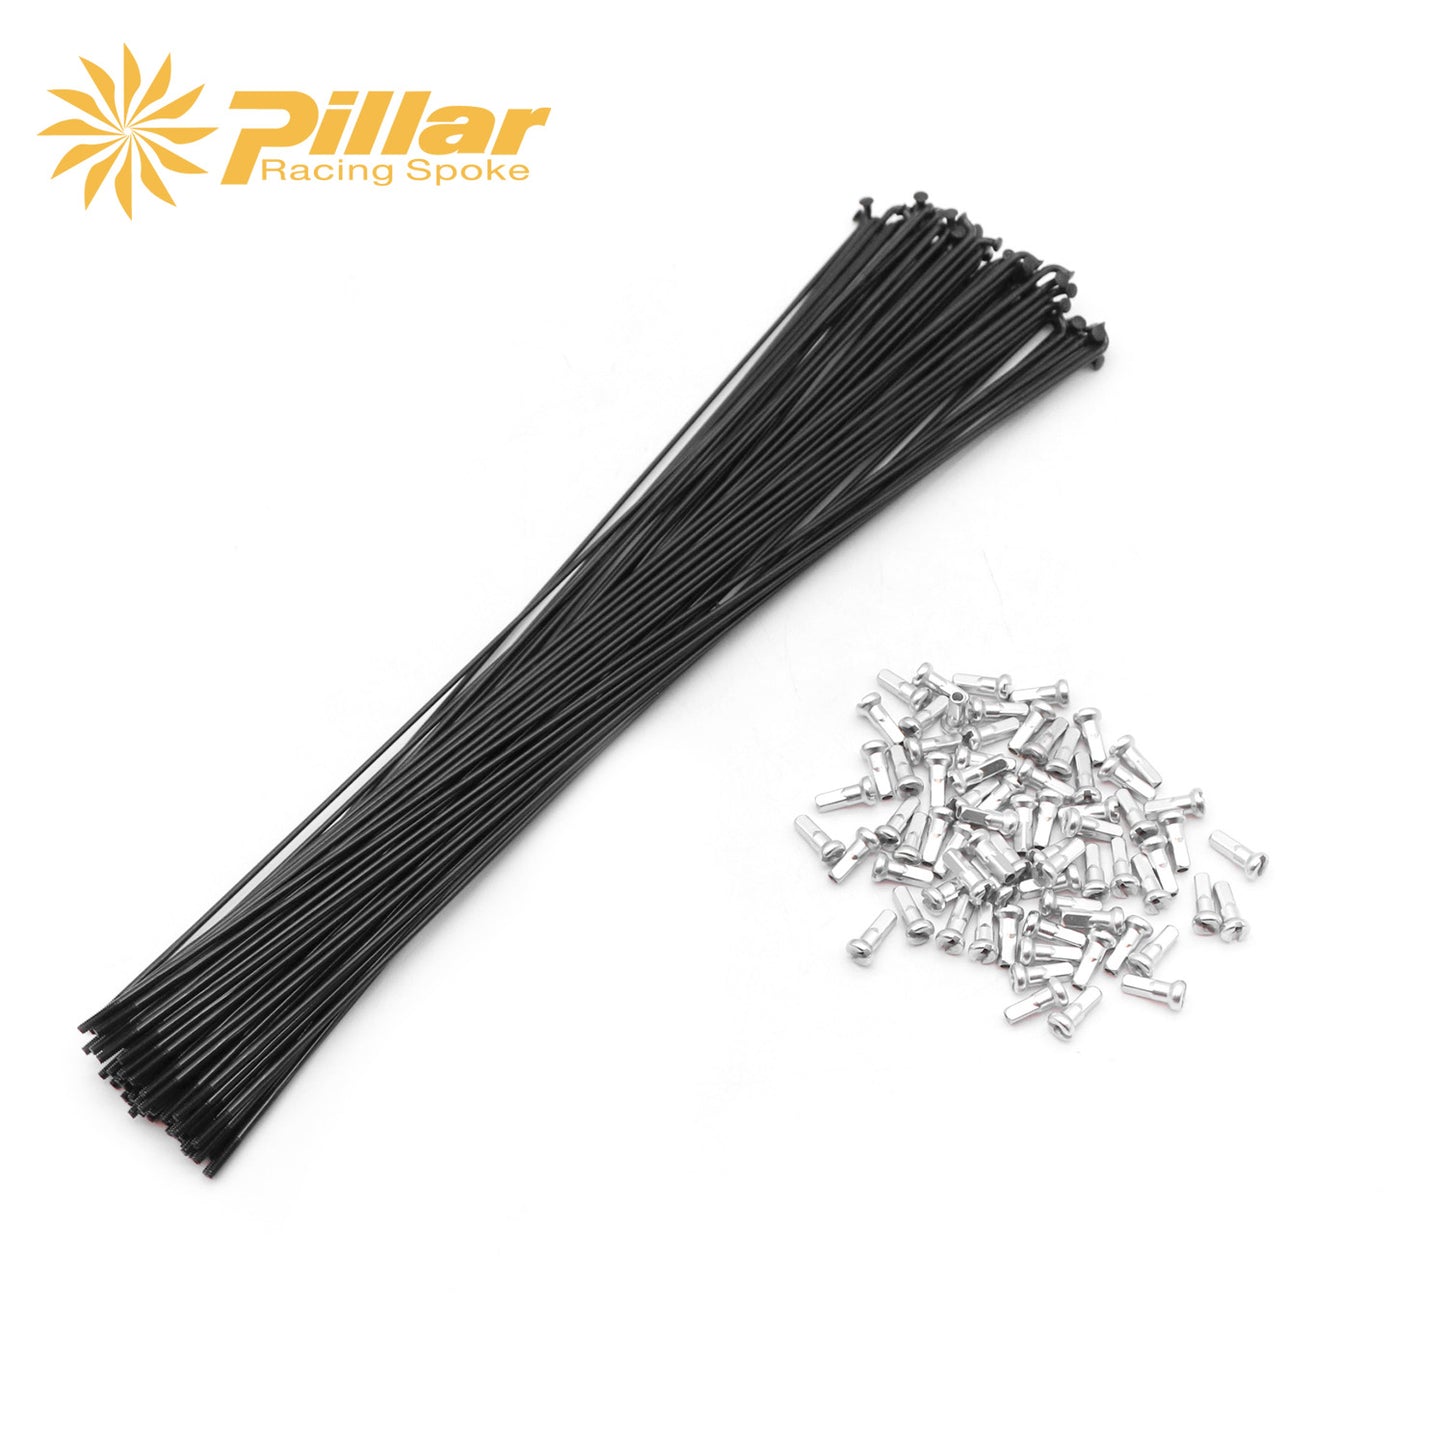 Pillar Racing Spokes Stainless / Alloy Nipples - Set of 72pcs - for 27.5 J-Bend